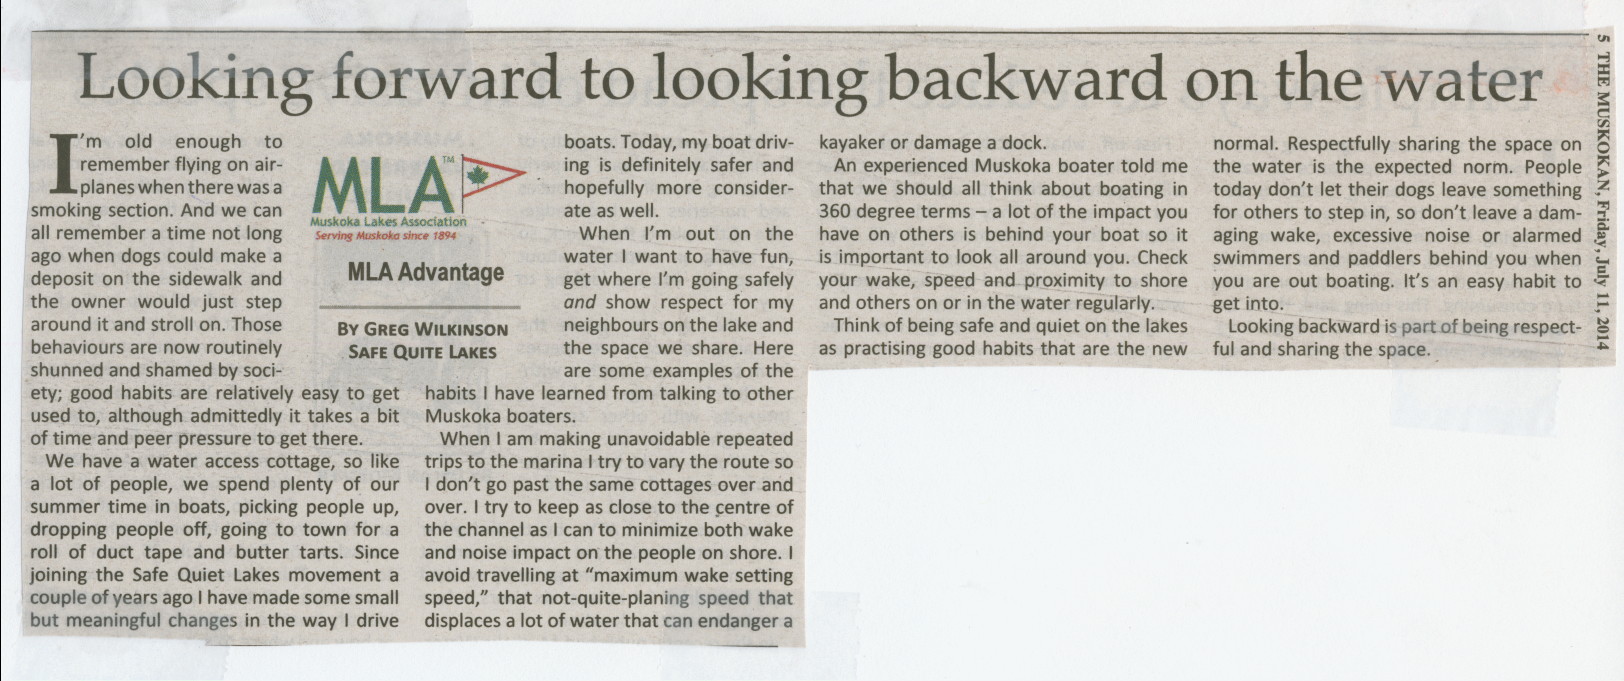 2014 - July 11 - Looking forward to looking backward on the water - The Muskokan page 5